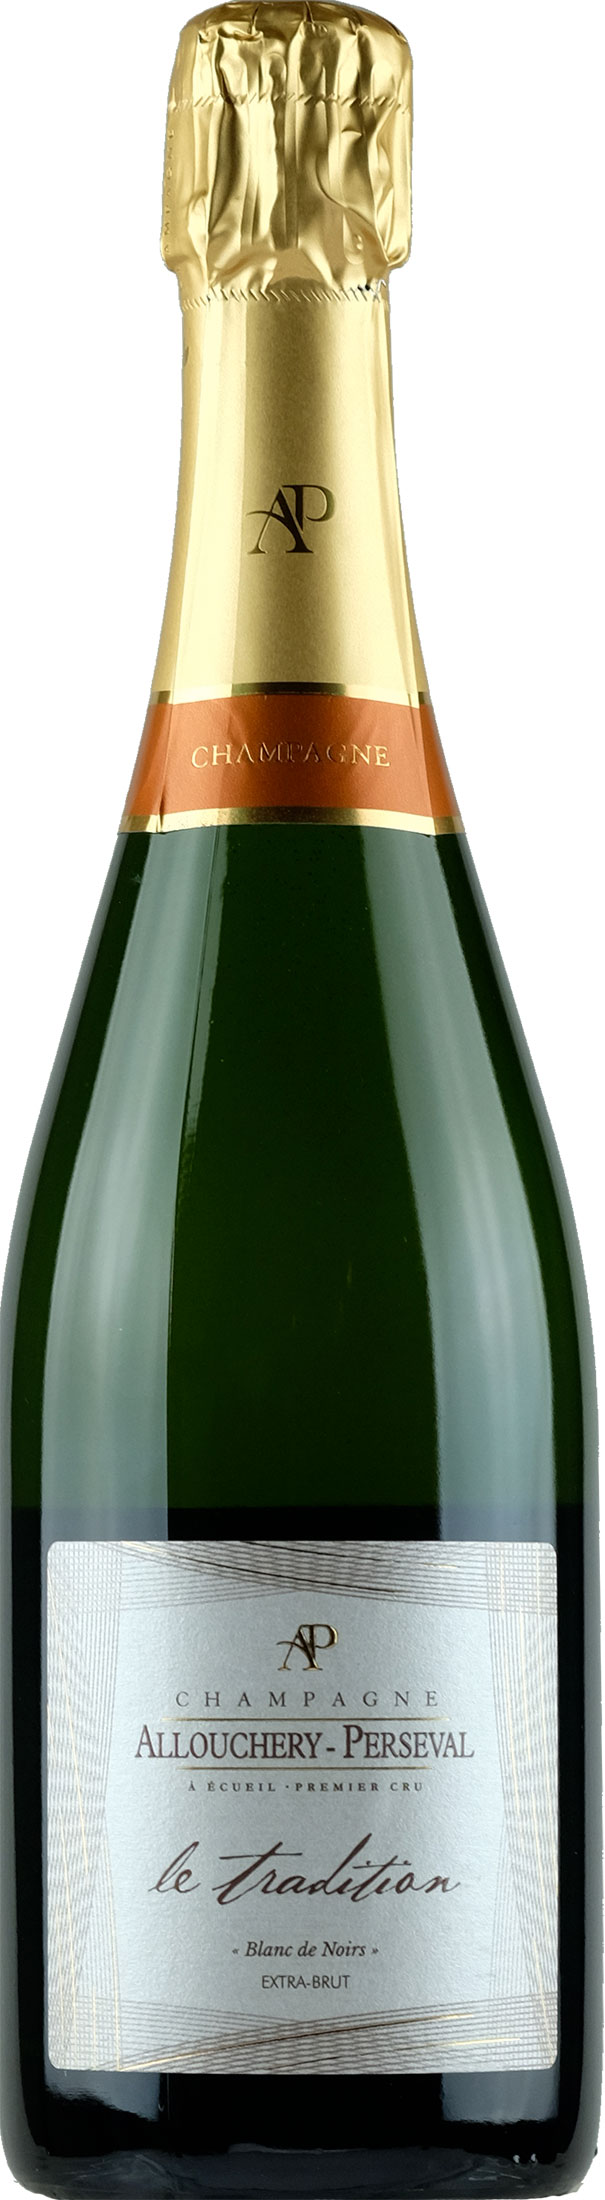 Allouchery-Perseval Champagne Le Tradition 1er Cru Extra Brut